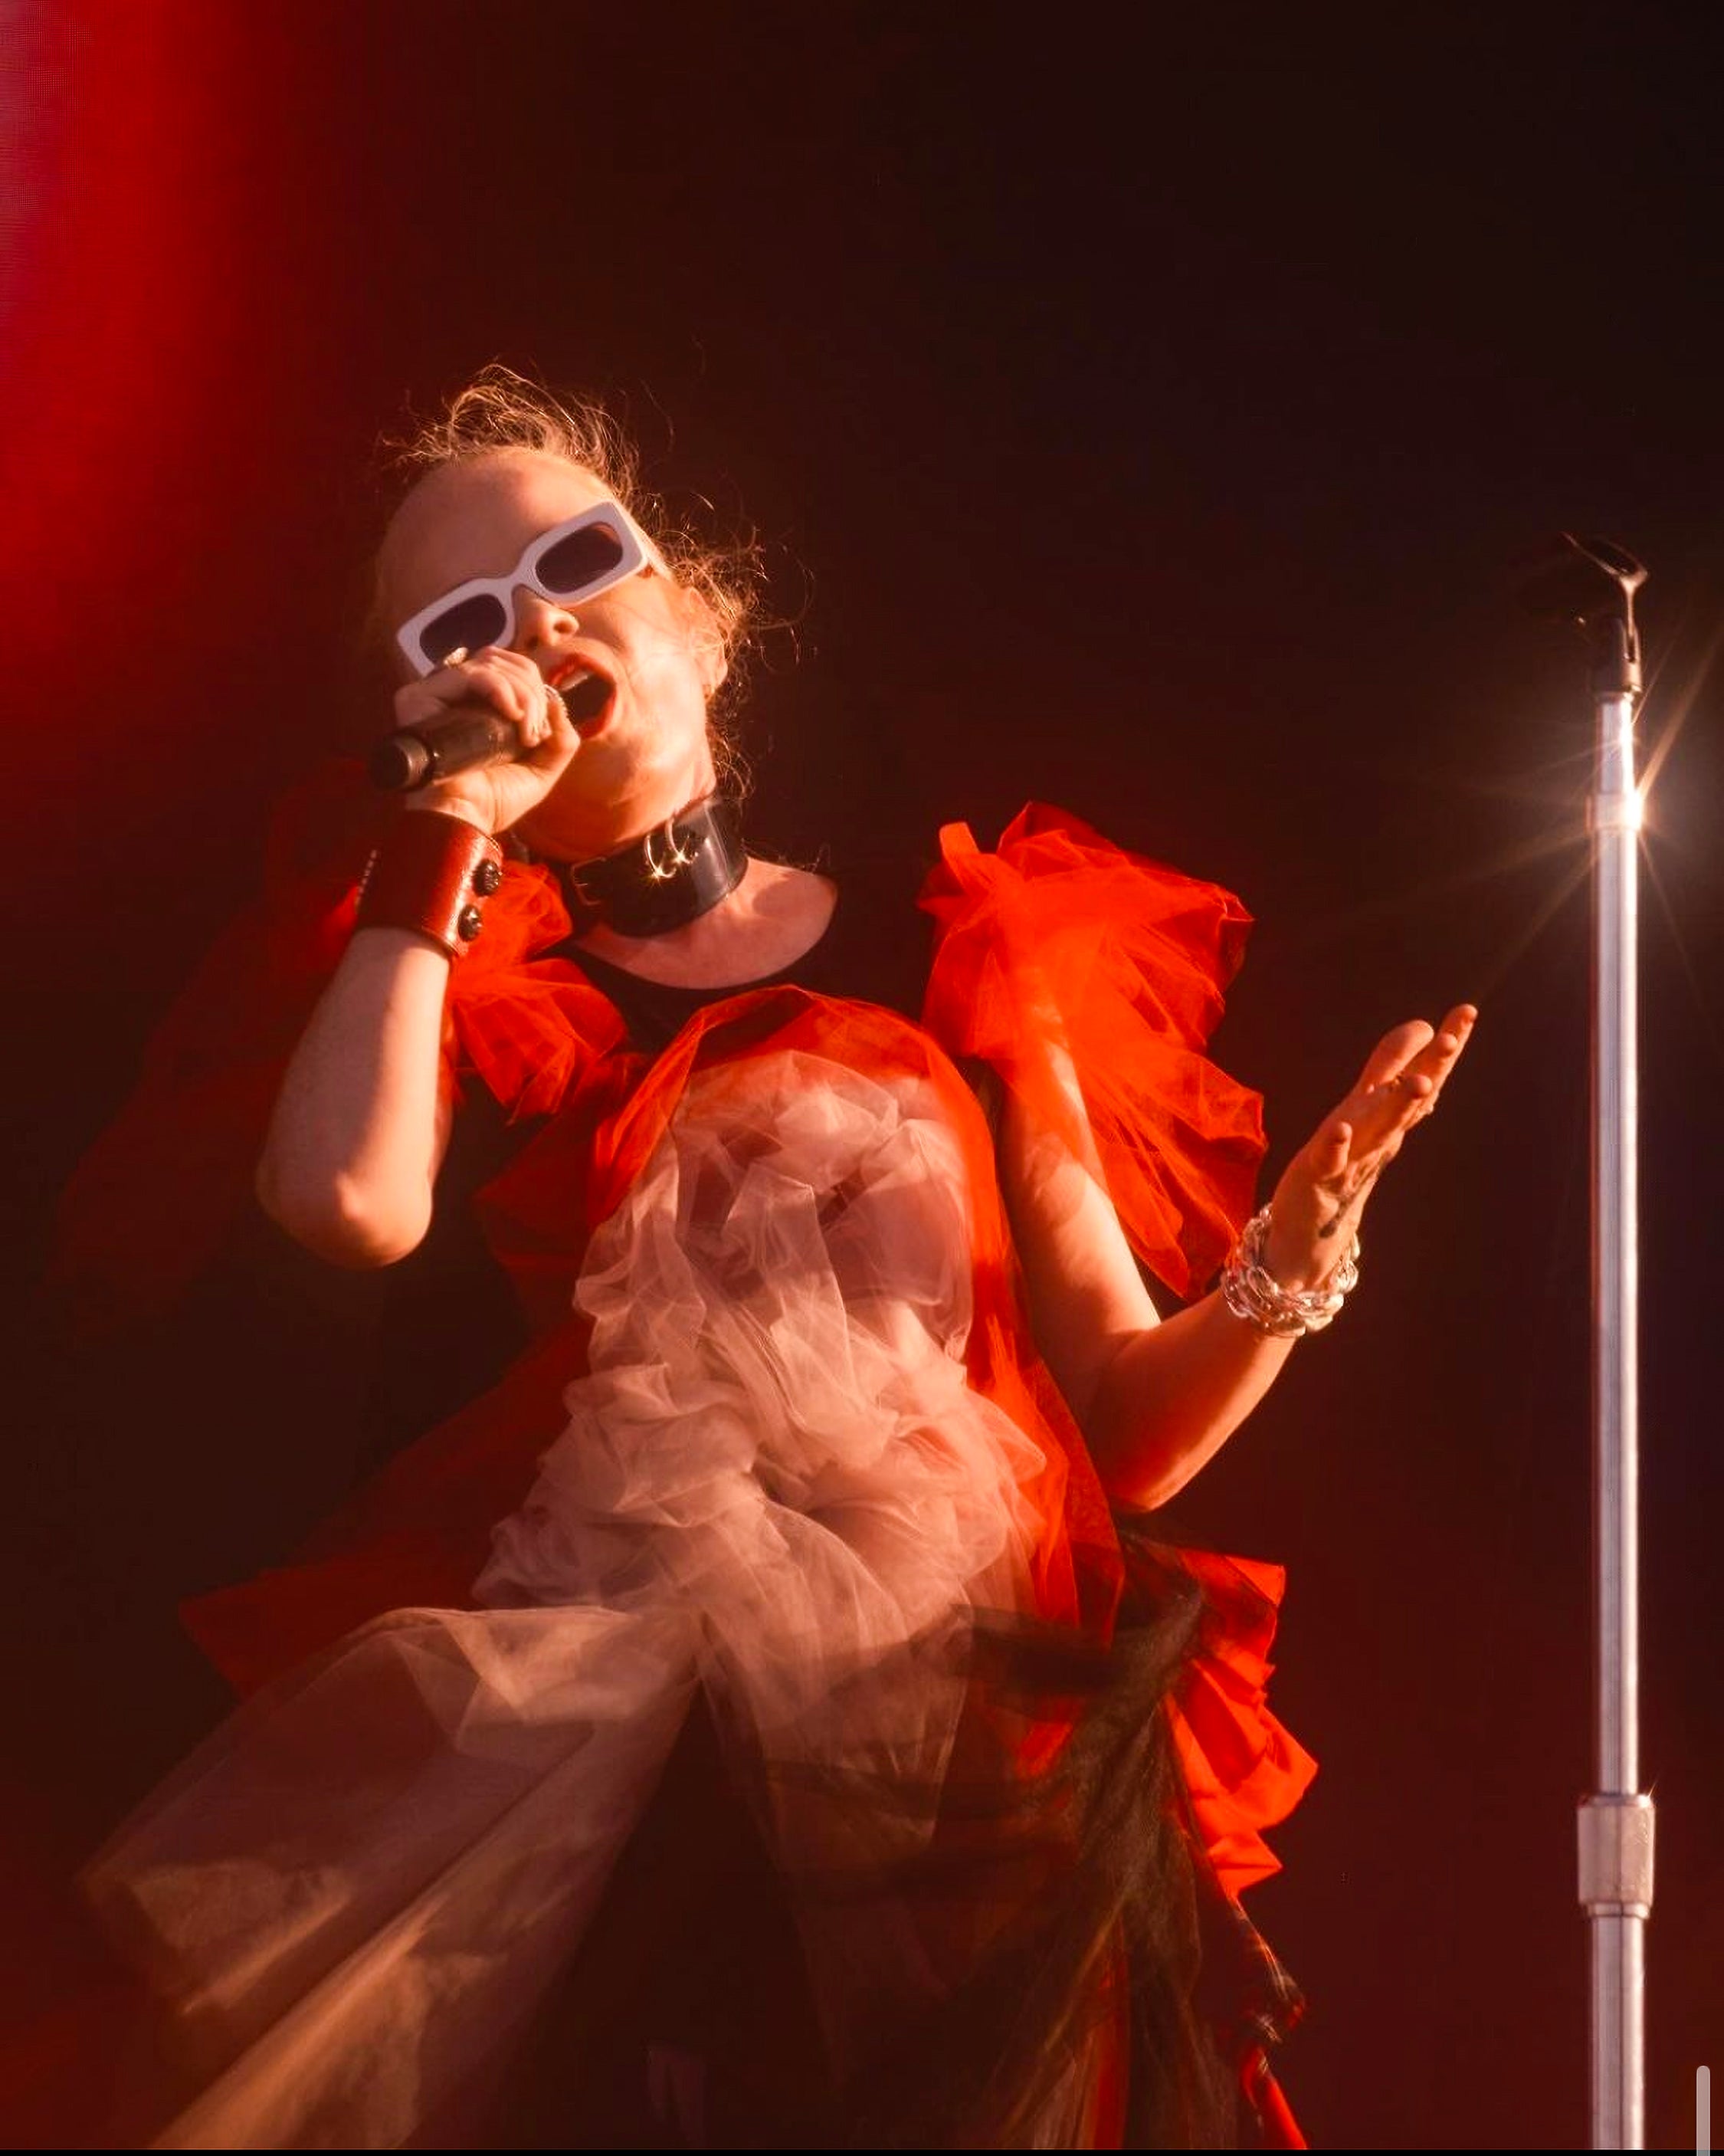 Show as worn by the absolutely incredible and my forever inspiration Shirley Manson from the band Garbage